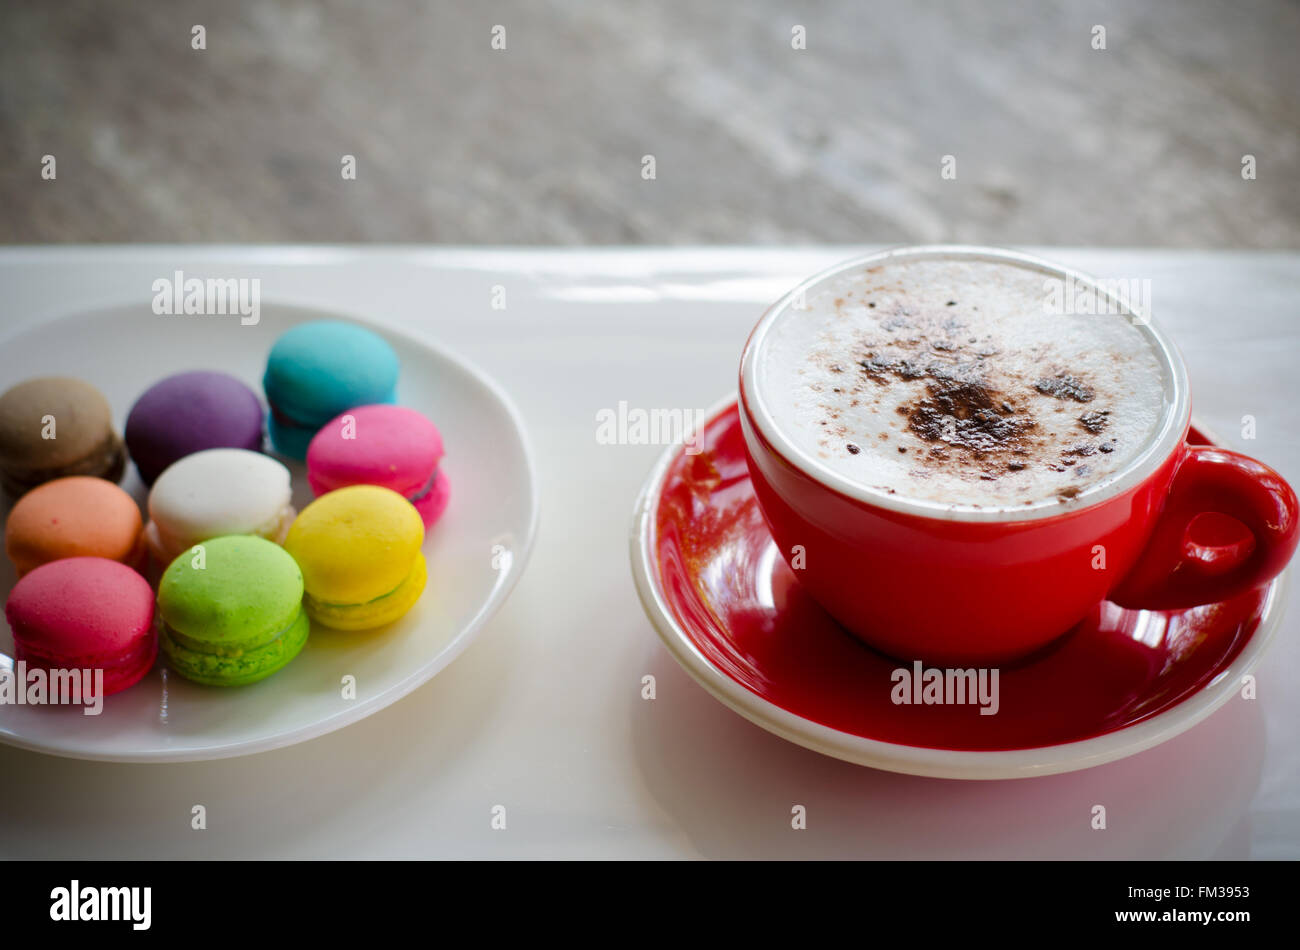 Cup of hot coffee and macaroons Stock Photo